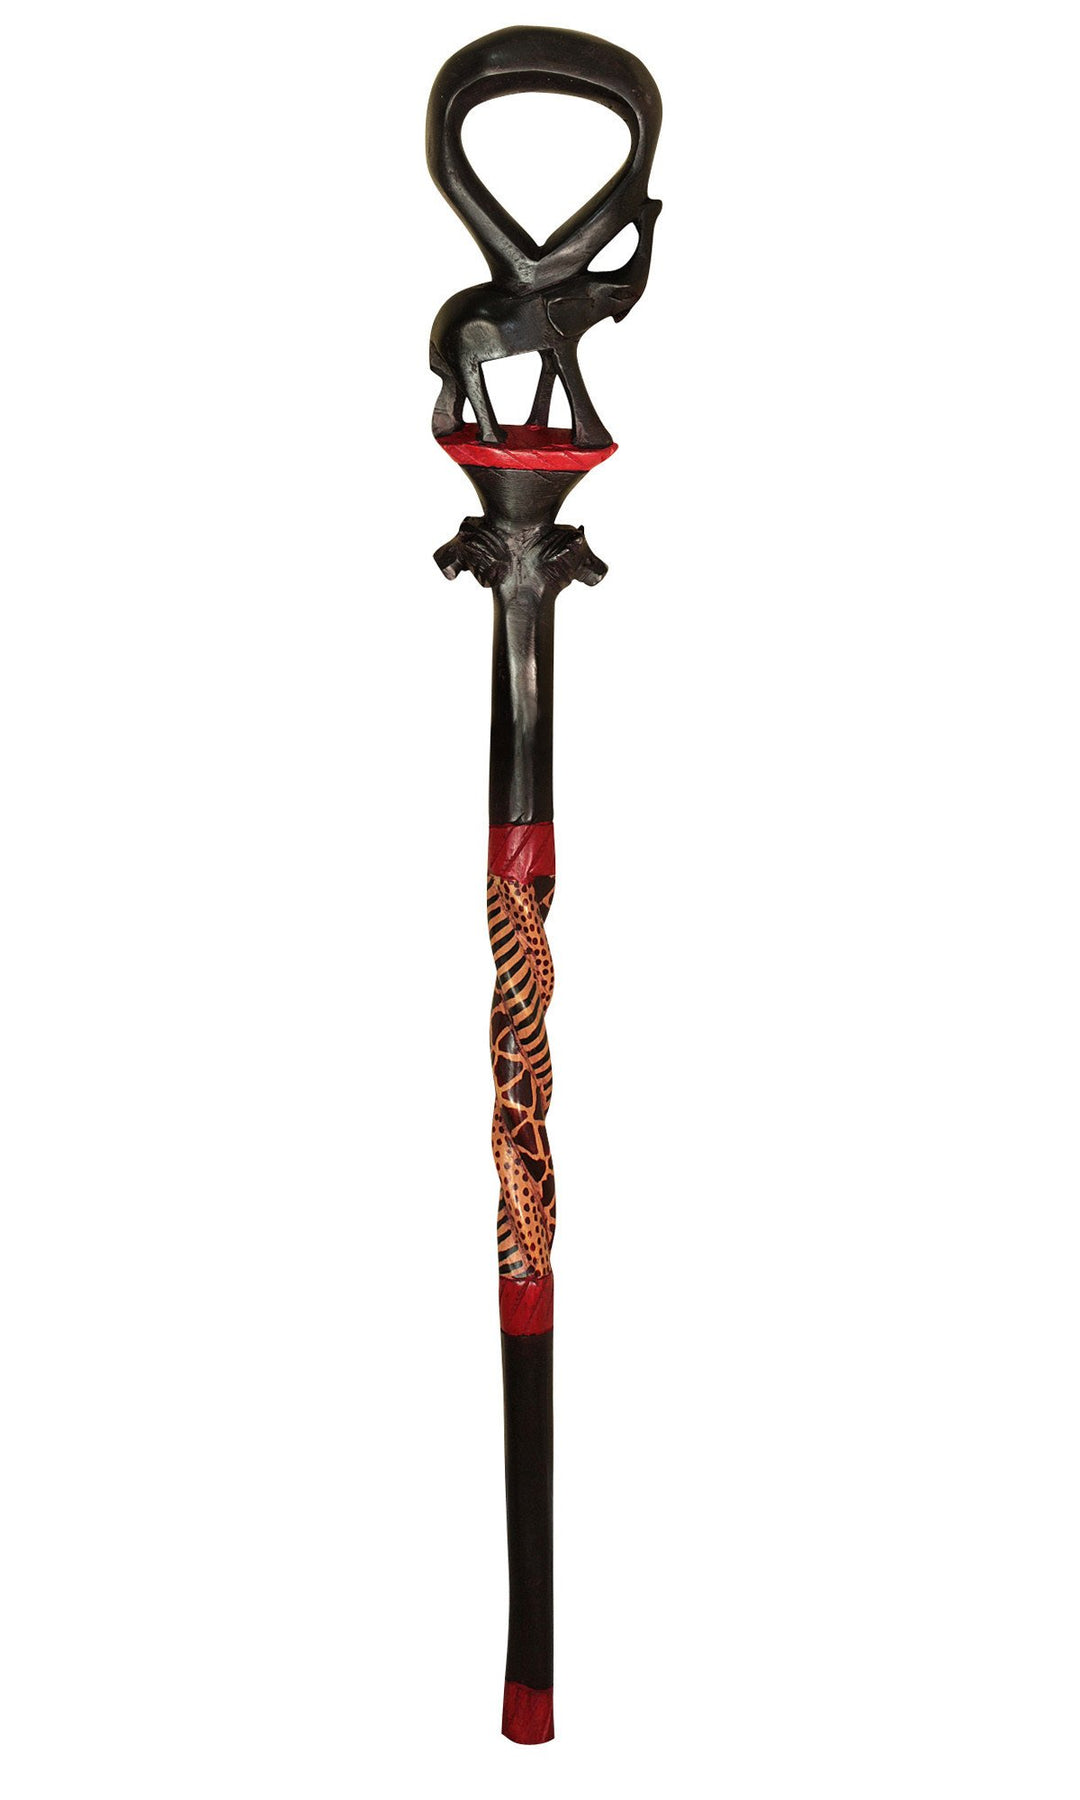 Elephant and Lion African Walking Cane (Hand Made in Kenya) – The